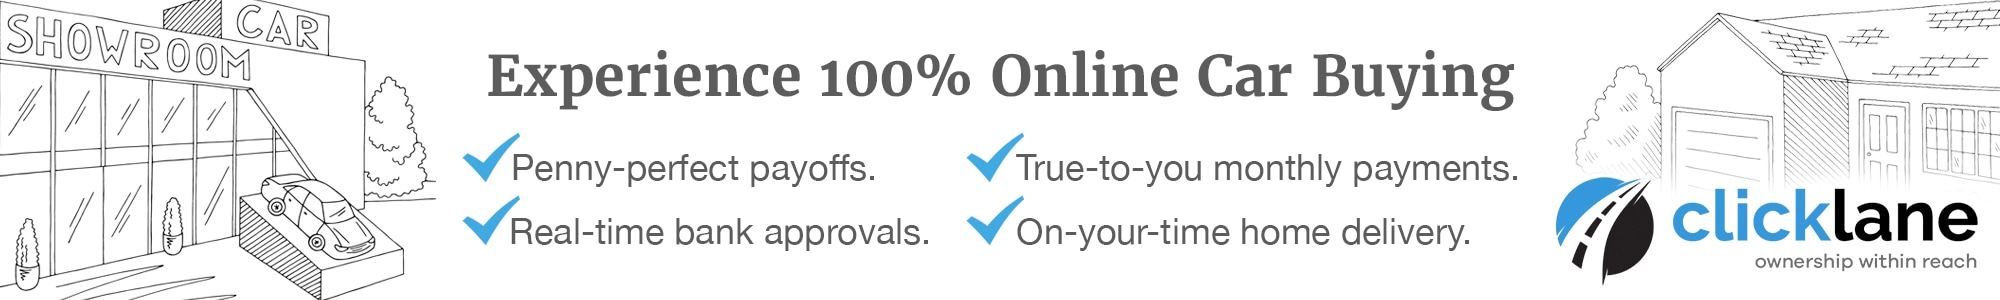 Buy Online with Clicklane